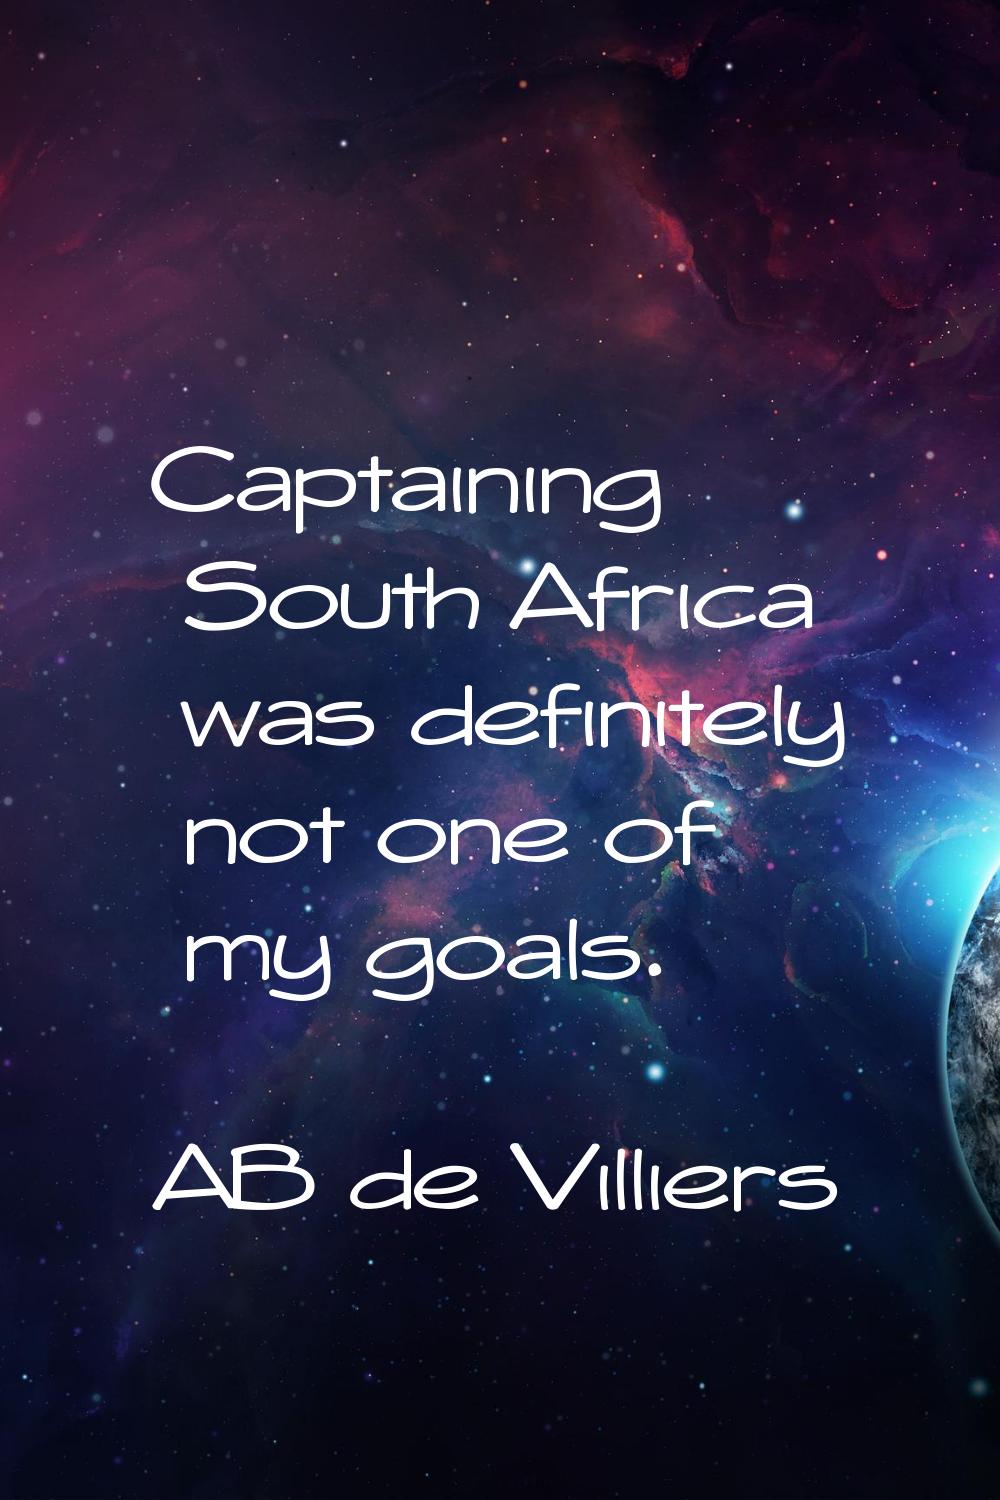 Captaining South Africa was definitely not one of my goals.